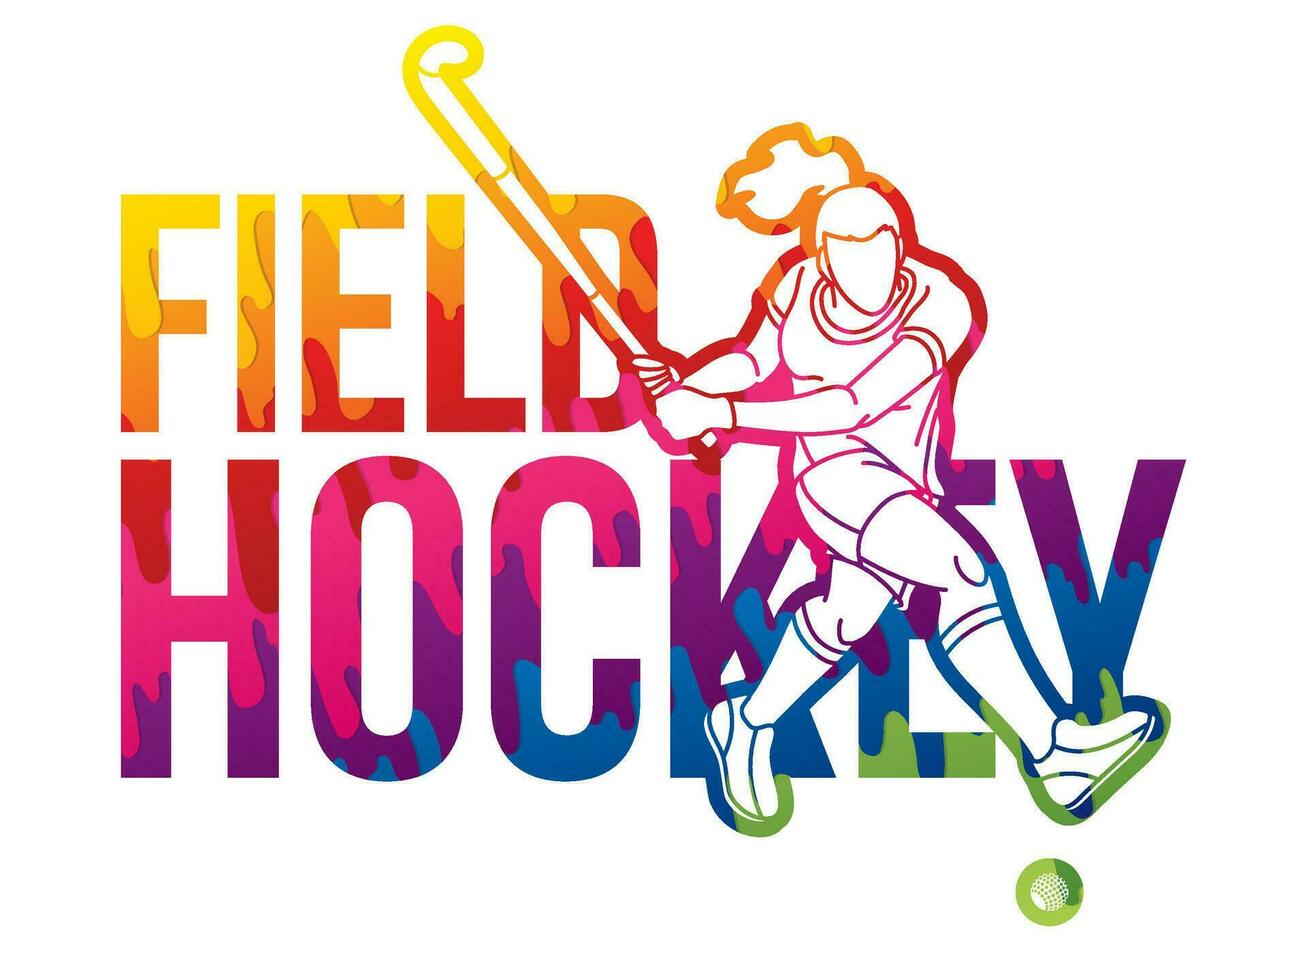 Field Hockey Font Design with Female Player Action Cartoon Graphic Vector